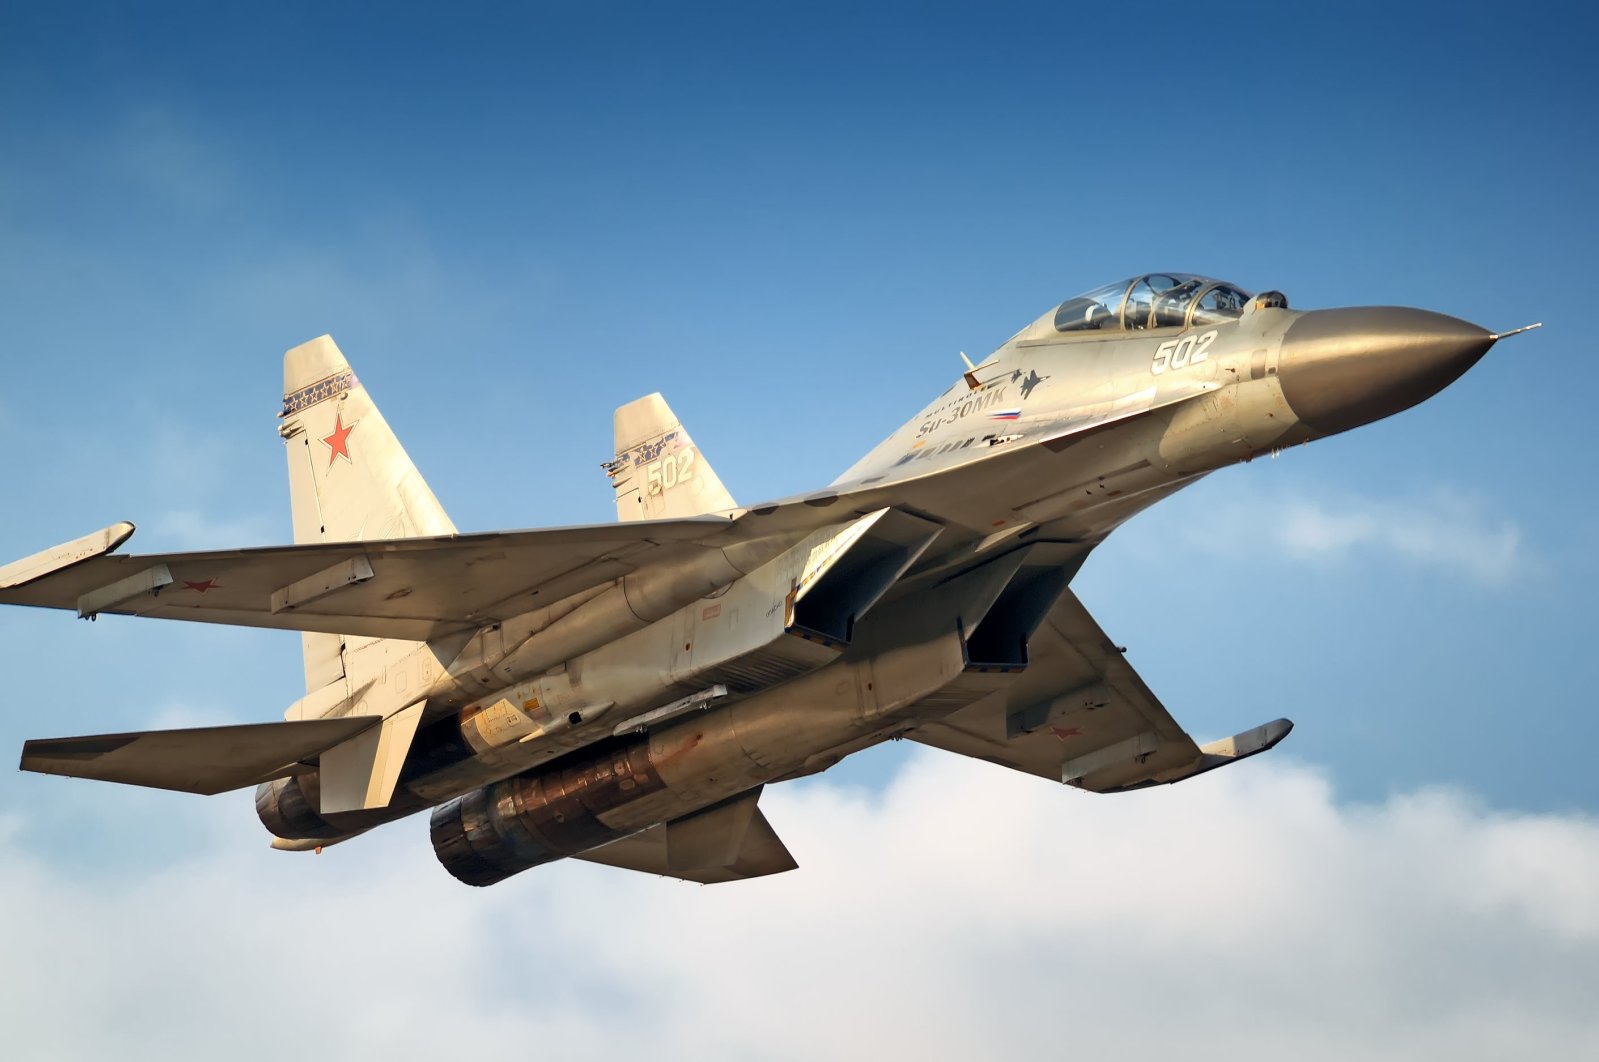 All crew killed after Russian fighter jet crashes